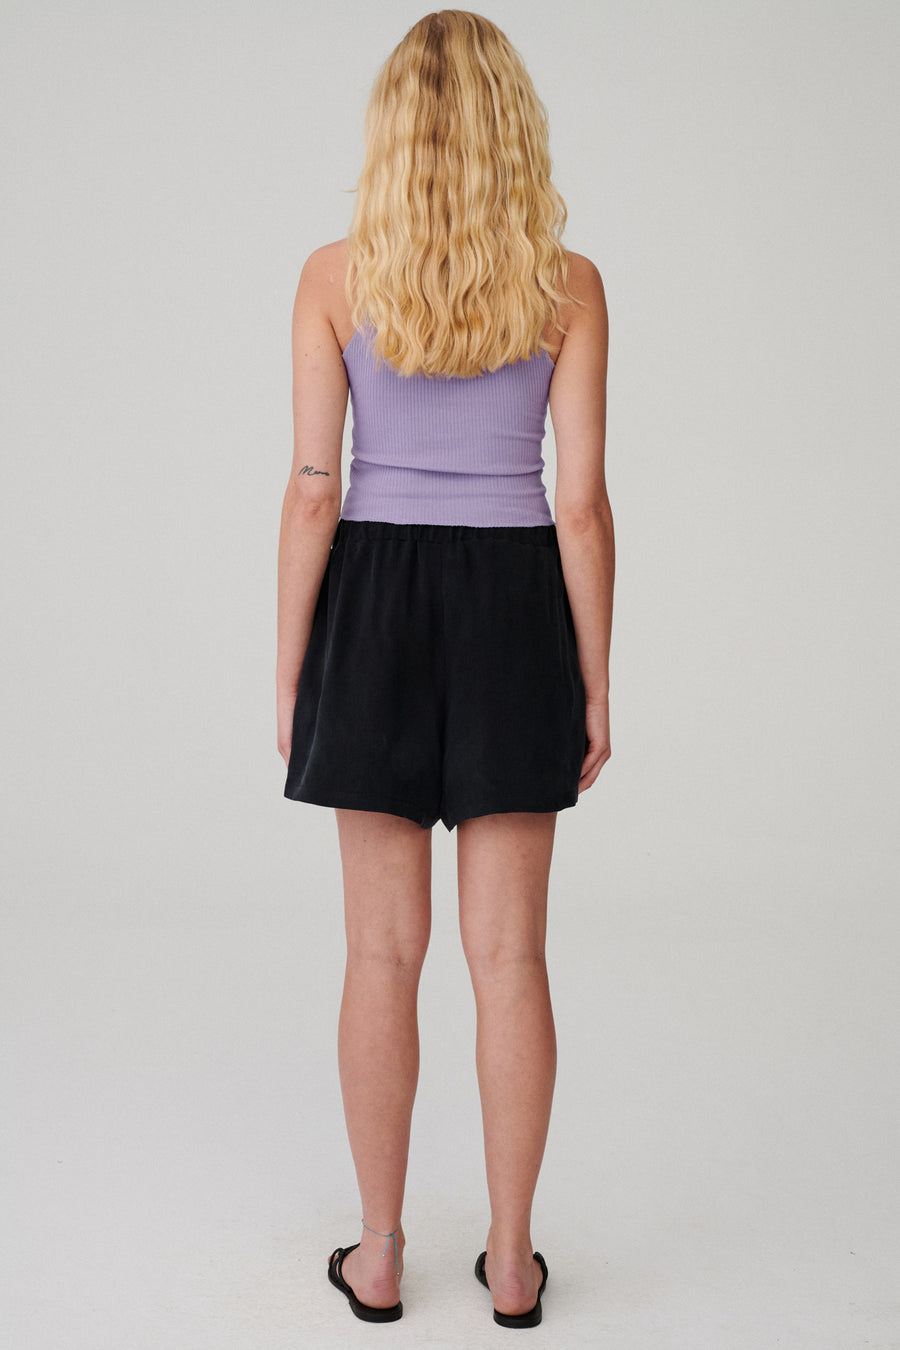 Top in organic cotton / 10 / 02 / acai fruit *shorts-in-cupro-09-08-graphite* ?The model is 173 cm high and wears size S?